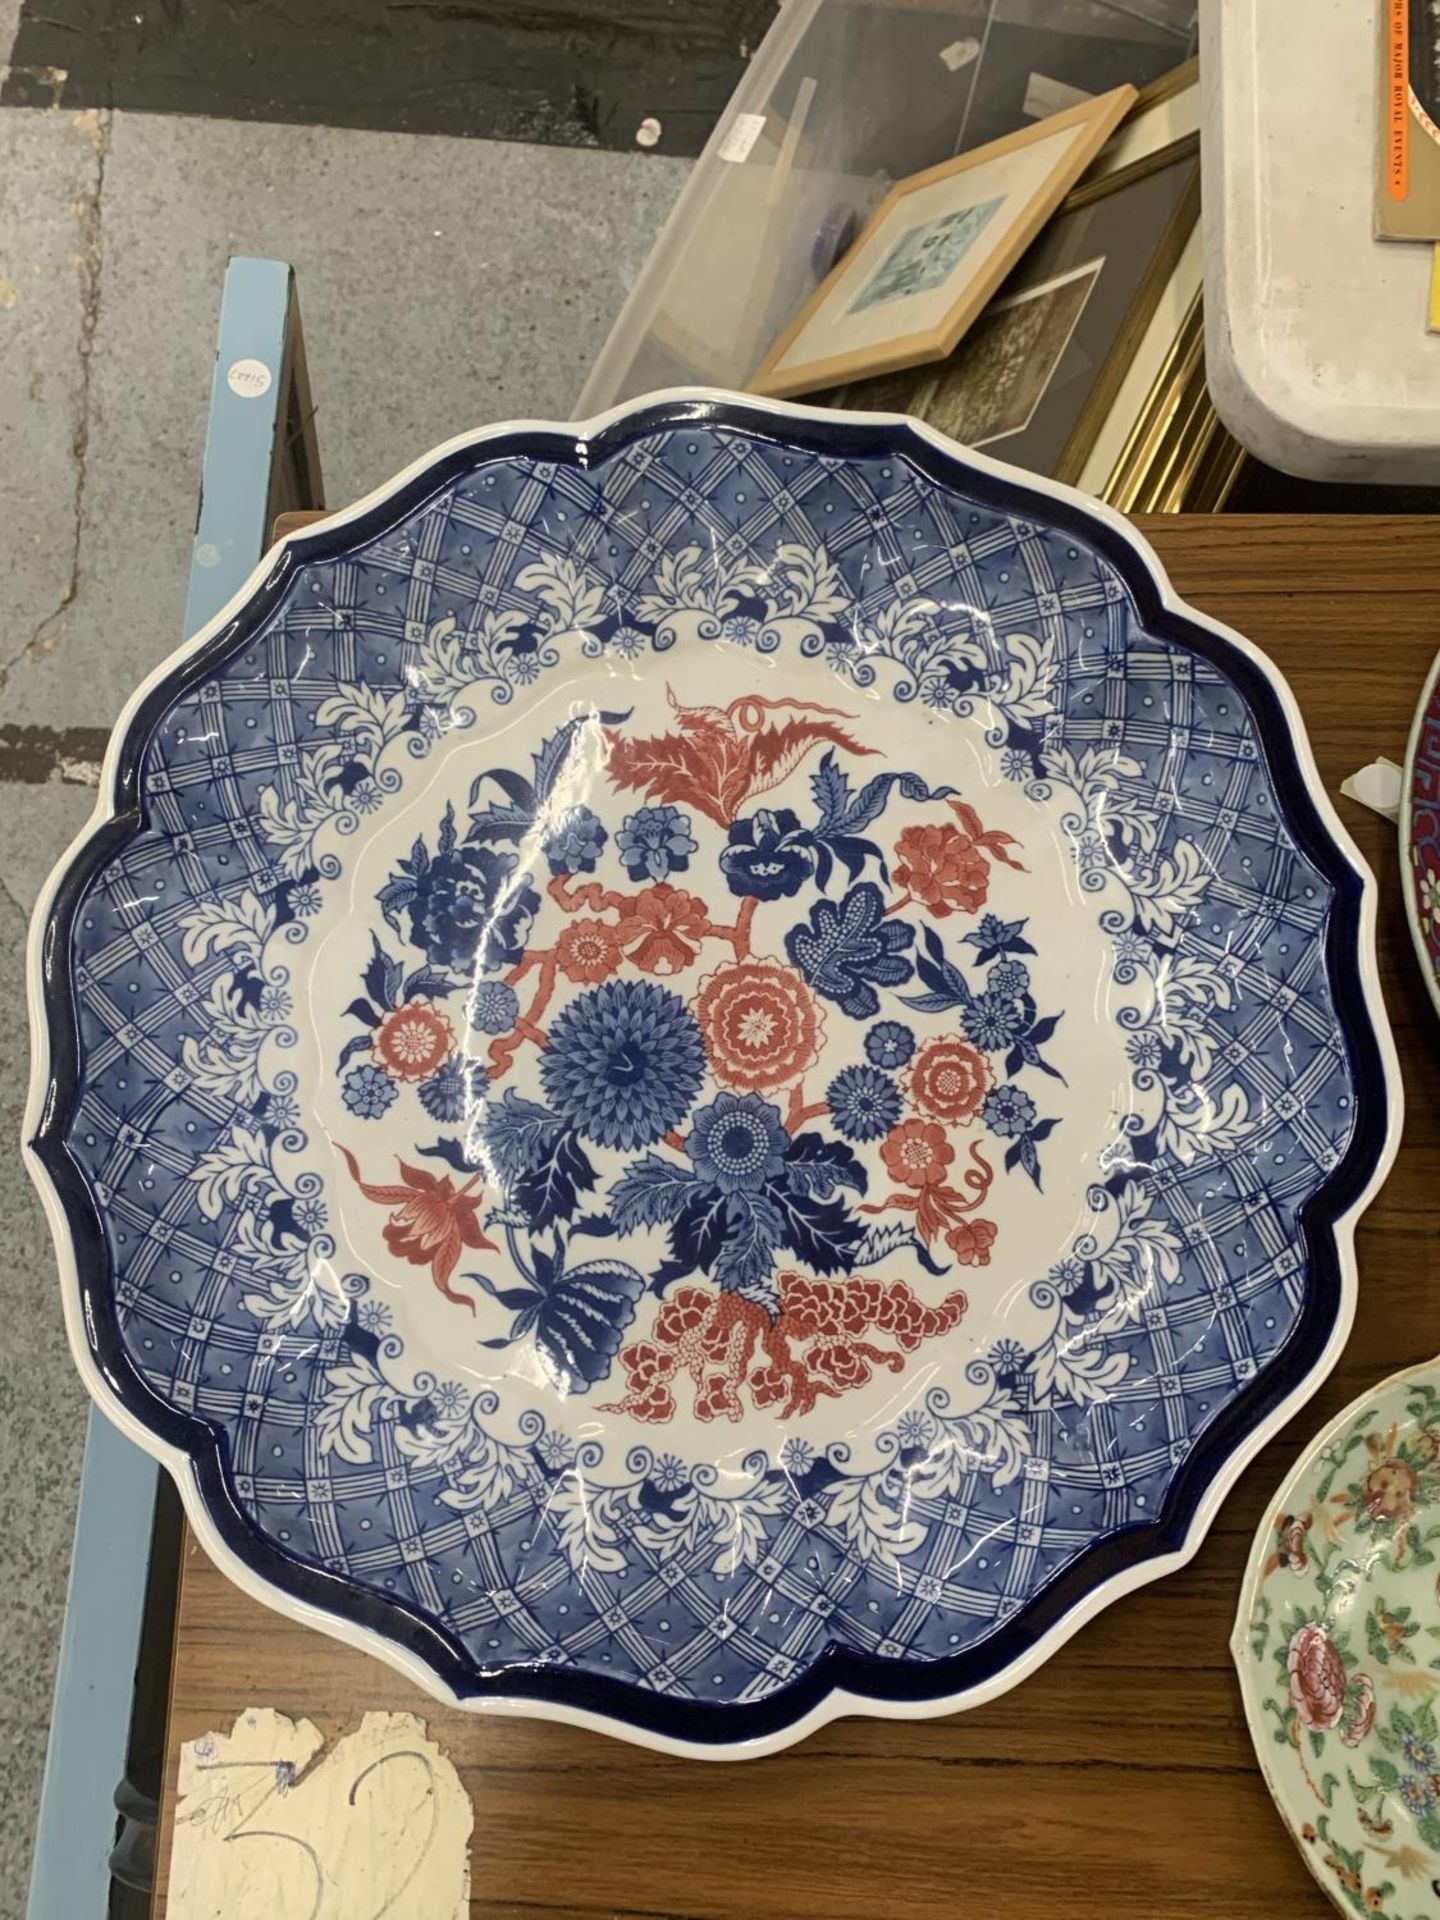 A LARGE CHARGER WITH BLUE, WHITE AND RED FLORAL PATTERN, DIAMETER 47CM, AN ORIENTAL STYLE CHARGE, - Image 2 of 4